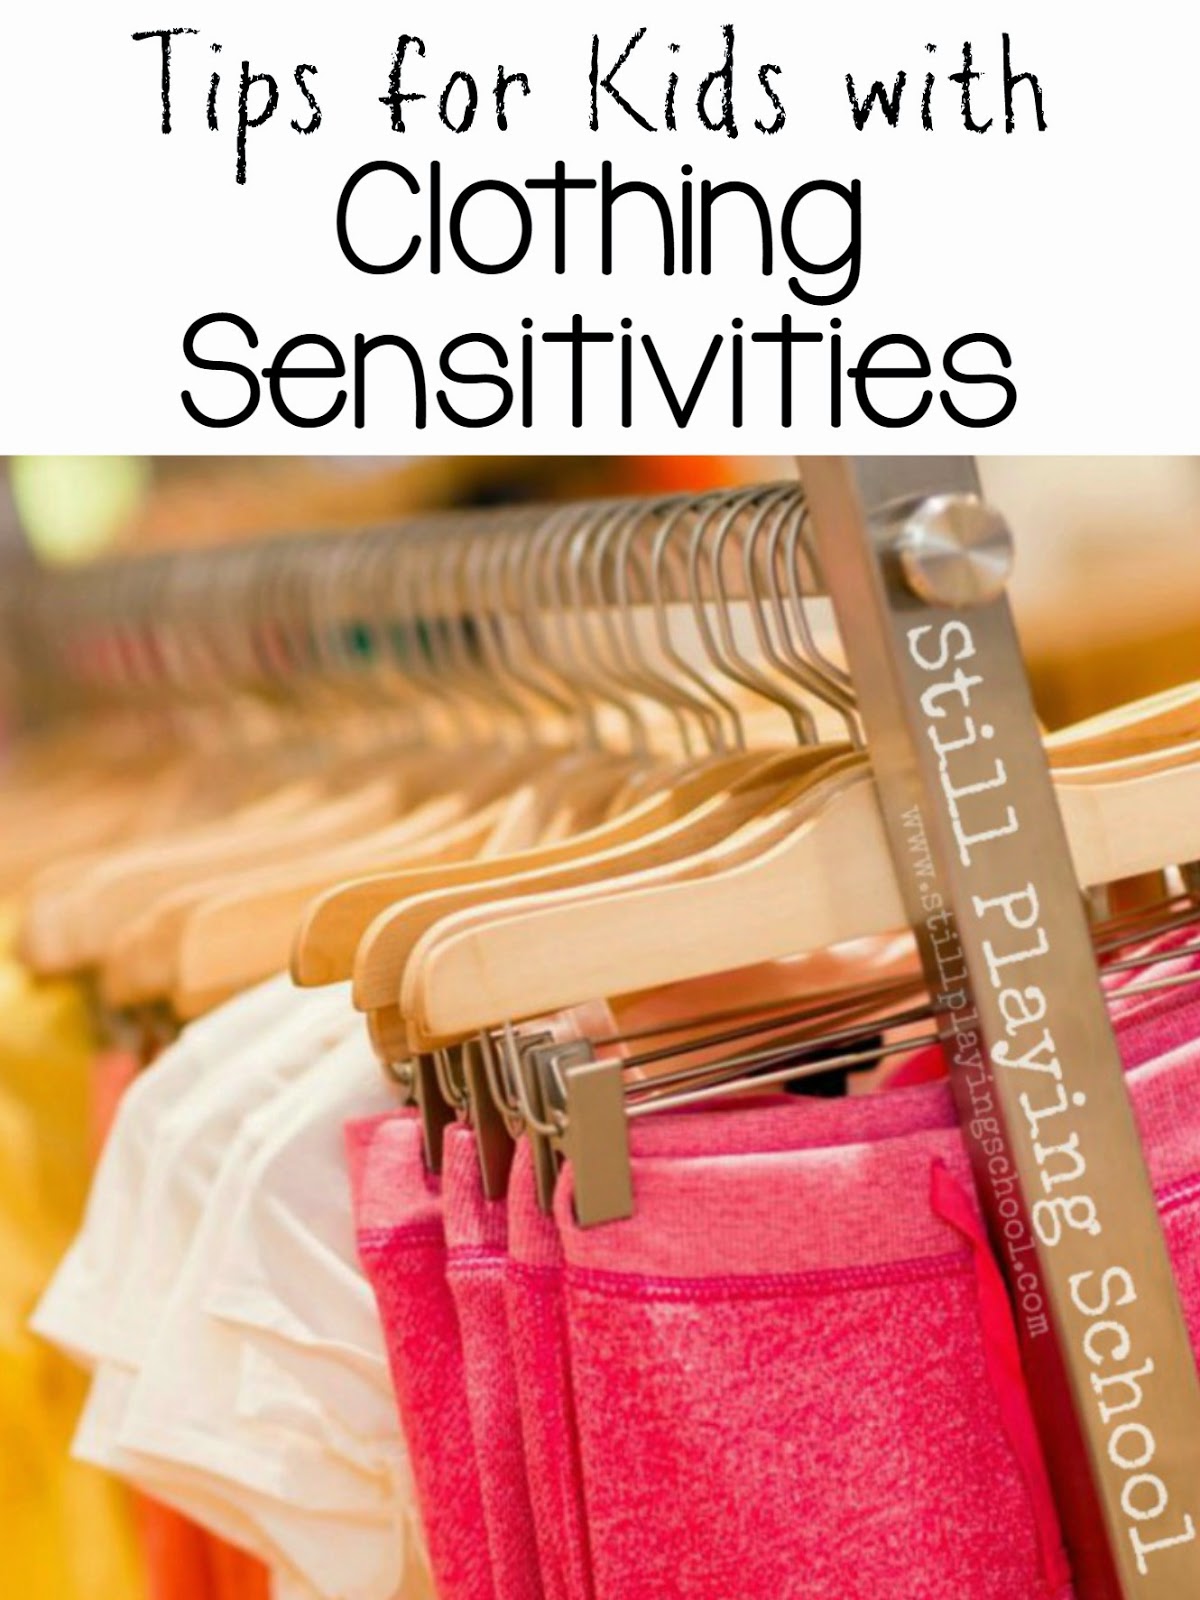 Tips for Kids with Clothing Sensitivities